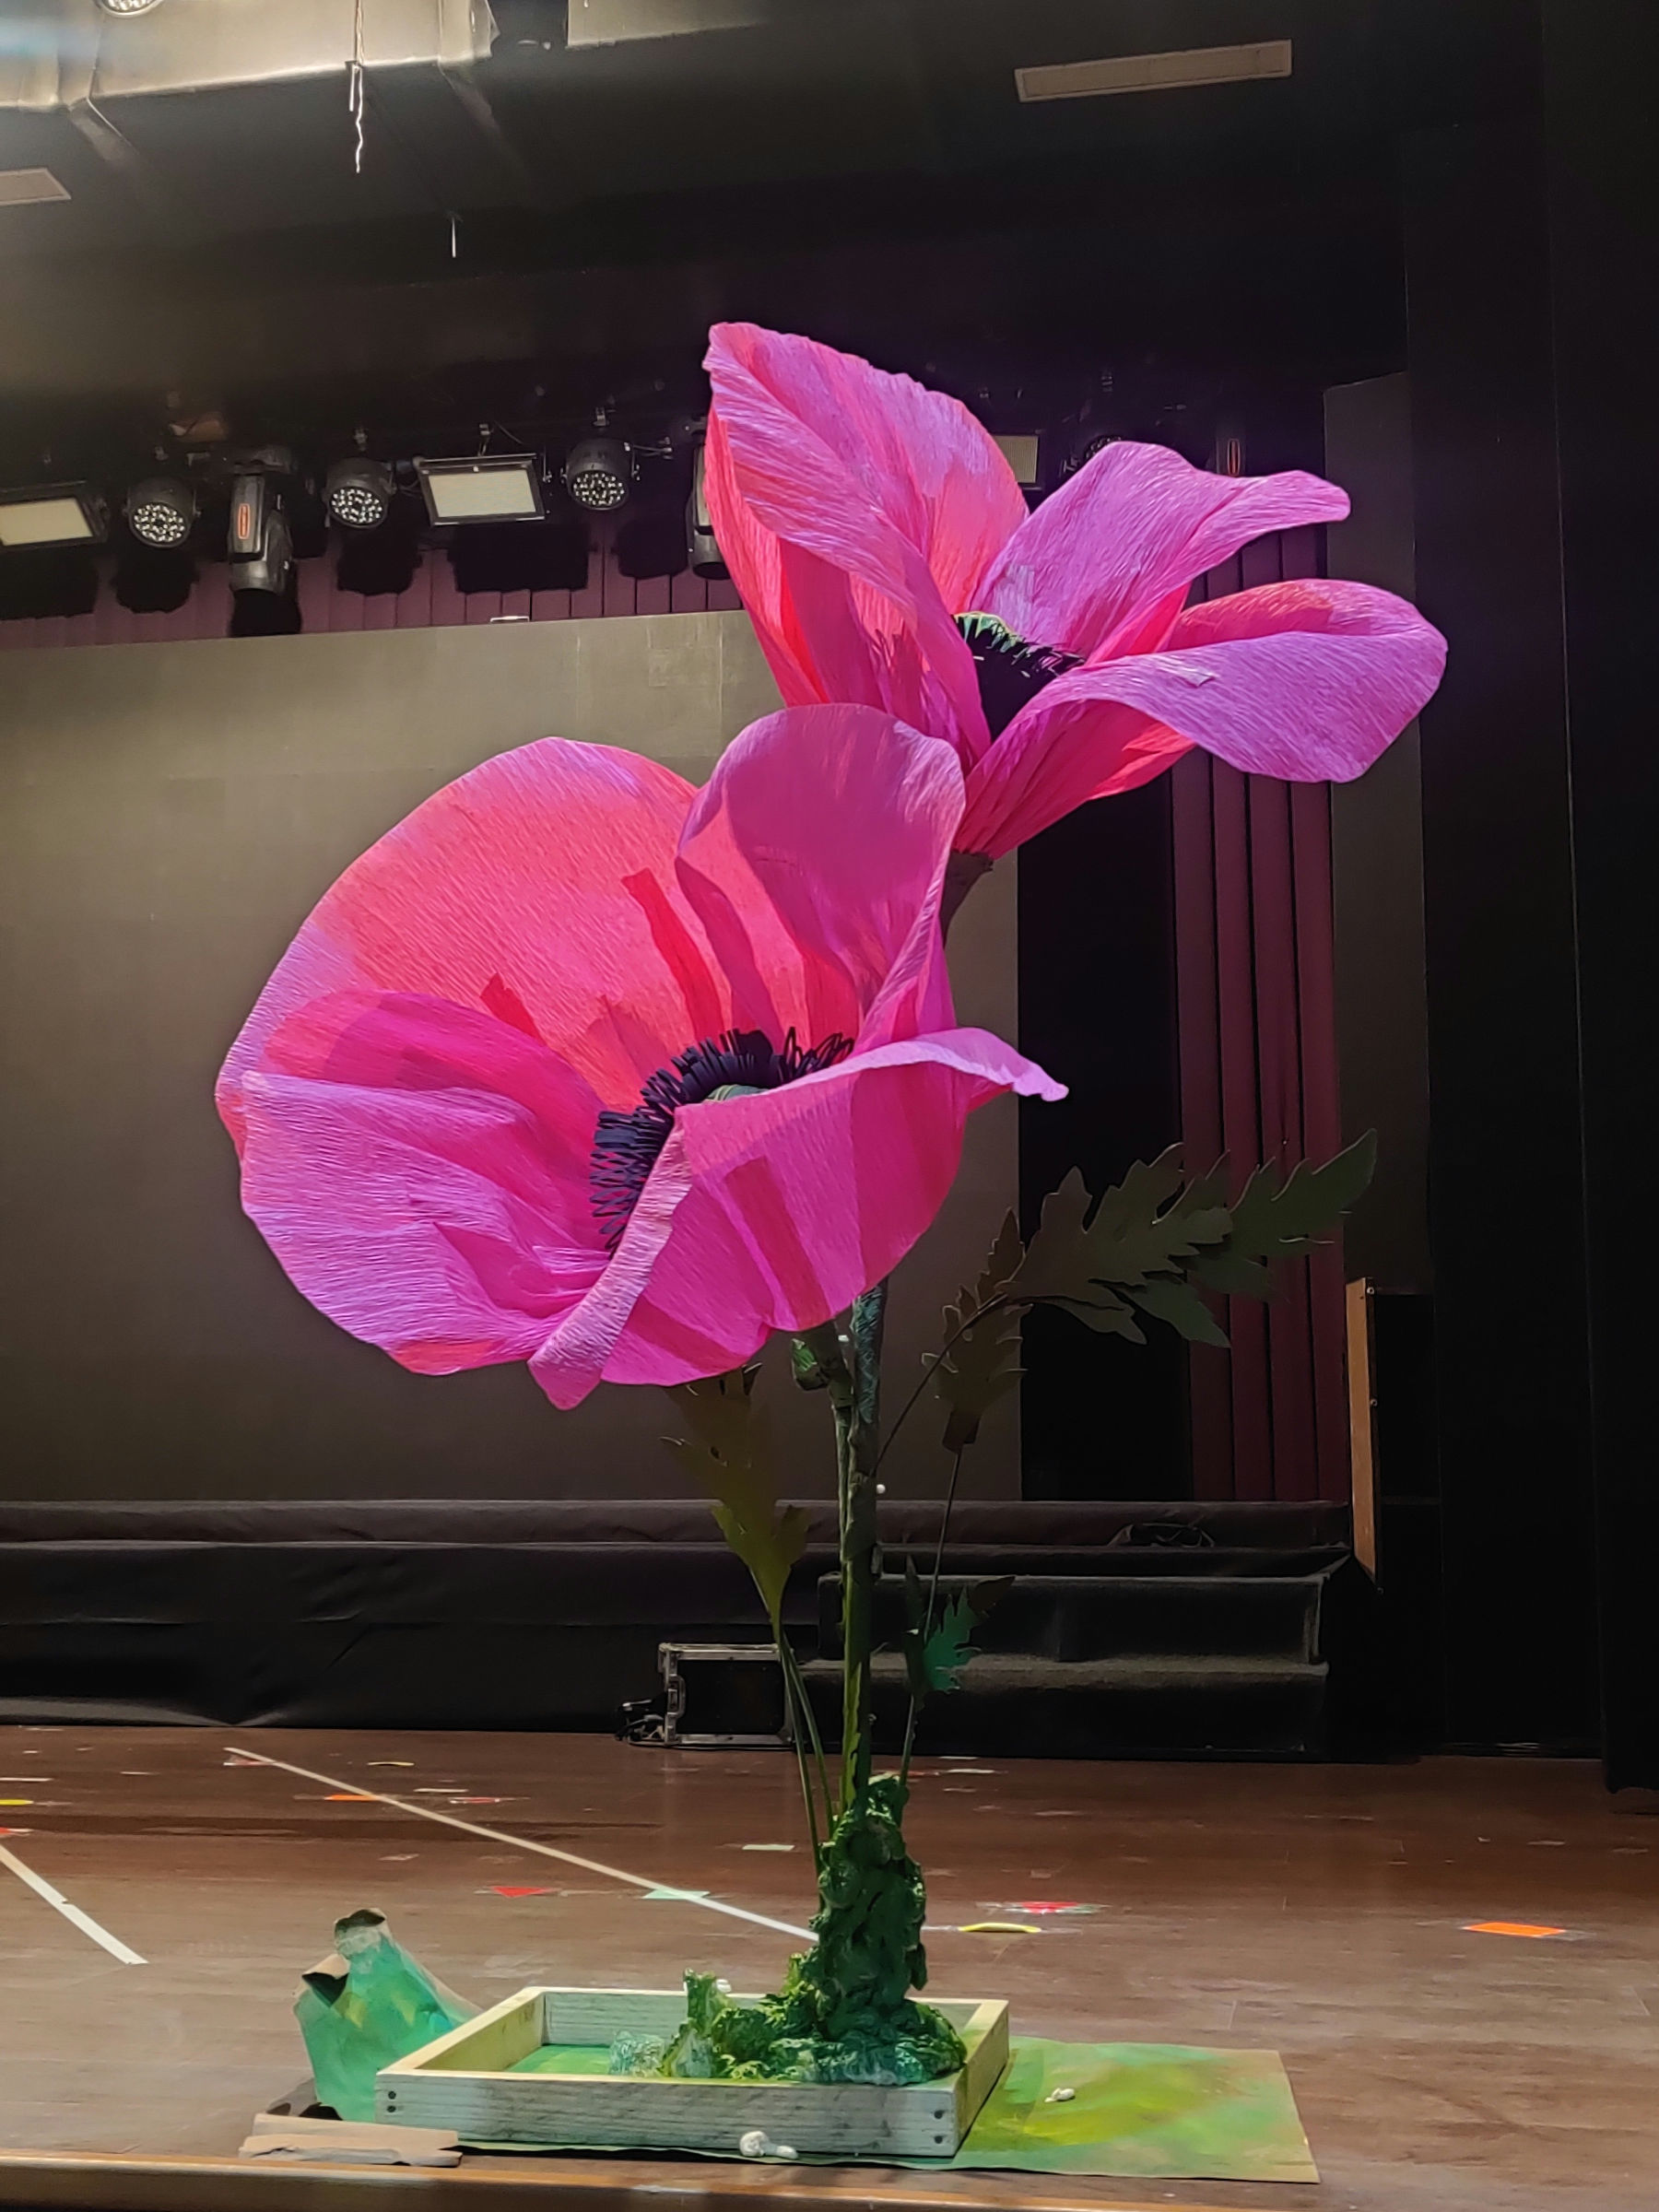 giant 5 feet poppies made as stage props!